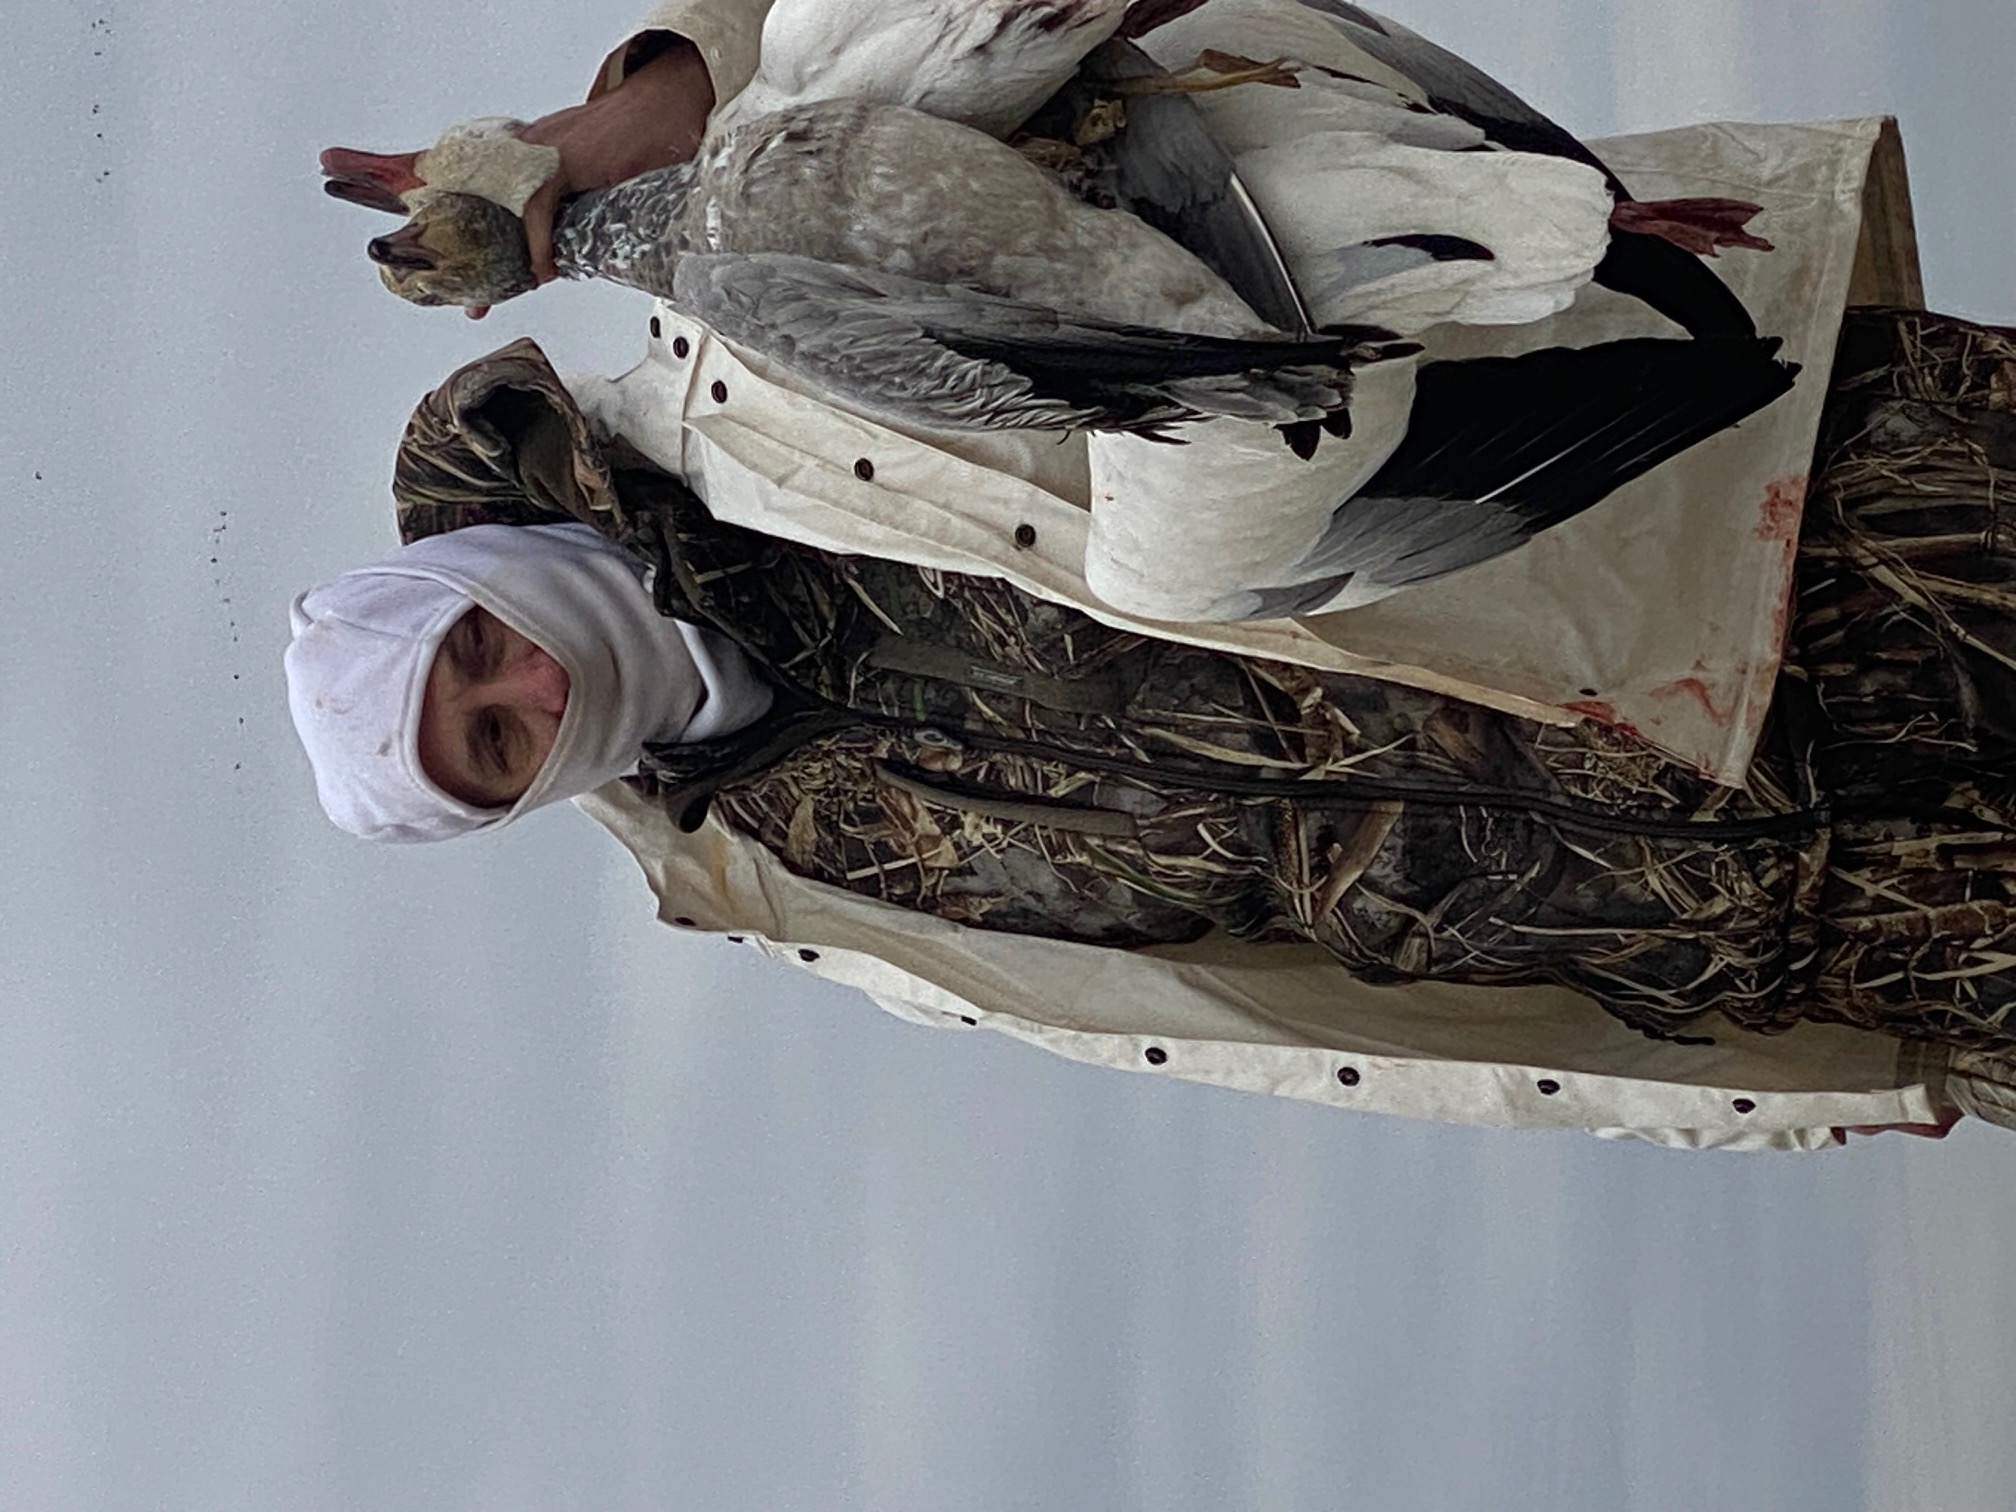 Whiteout Outfitters Spring Snow Goose Hunts spring-snow-goose-hunts-whiteout-outfitters-022423-2.jpg